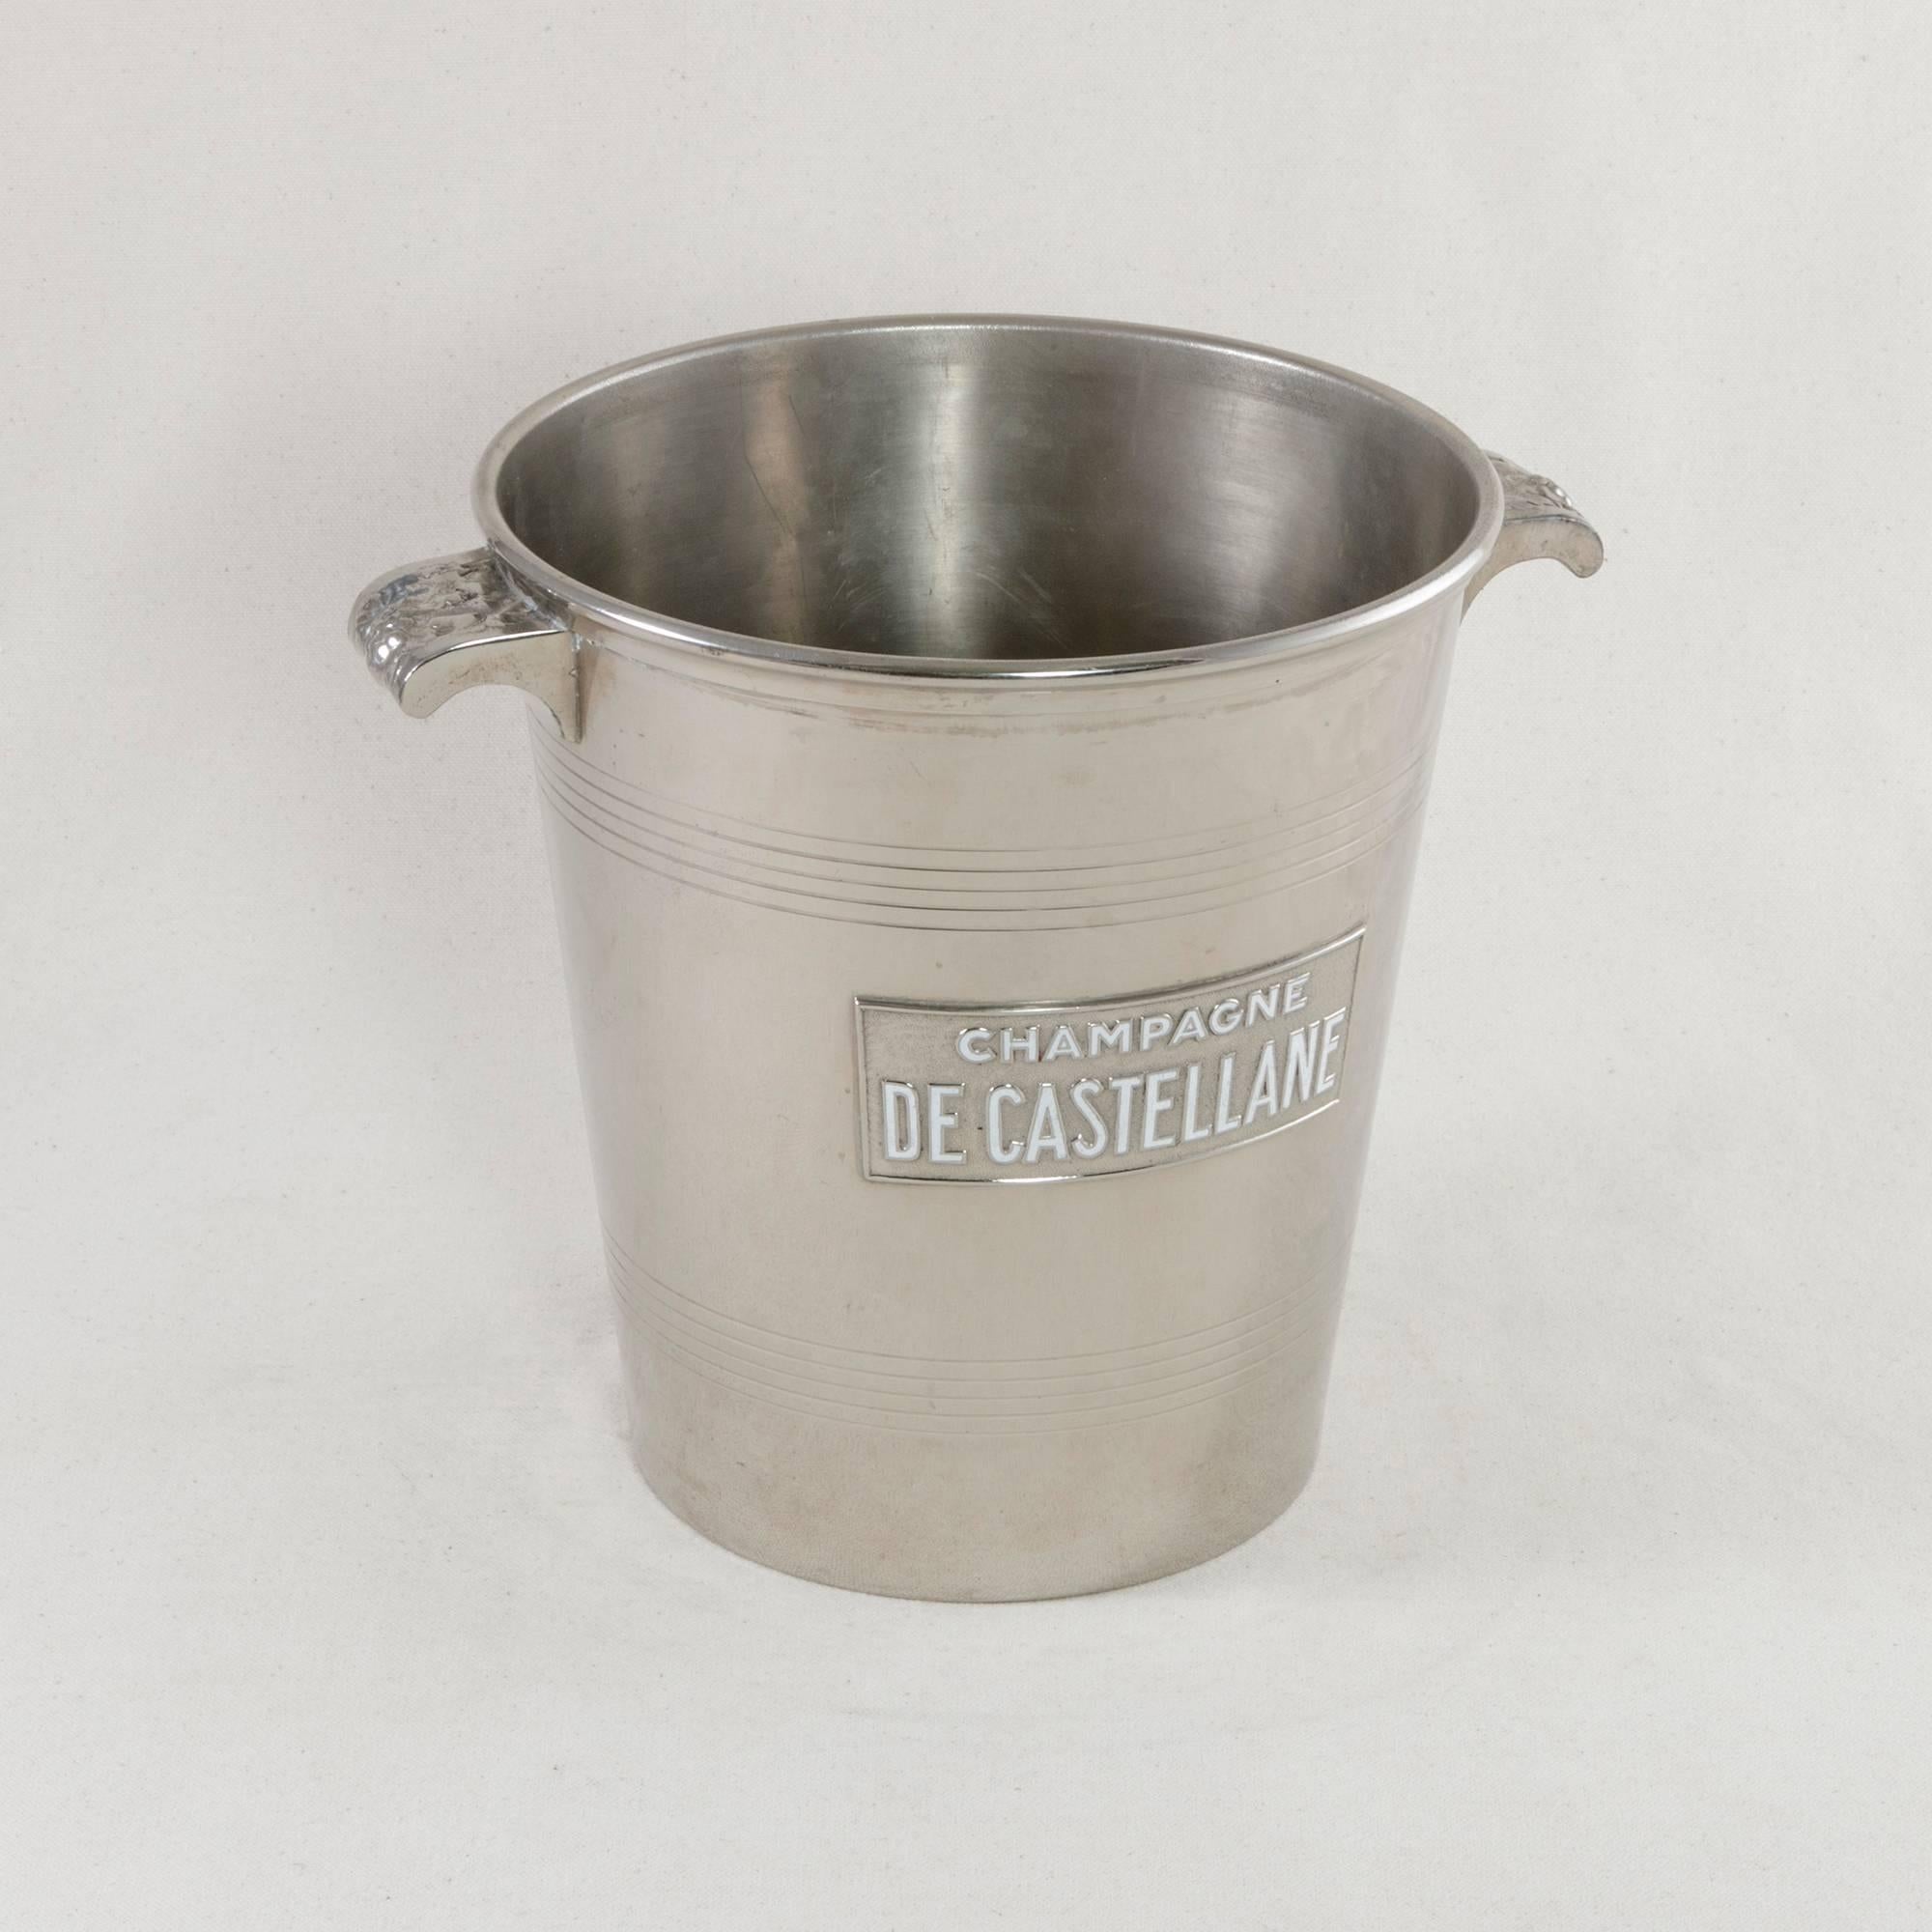 French Early 20th Century Silver Plate De Castellane Champagne Bucket, Enameled Letters